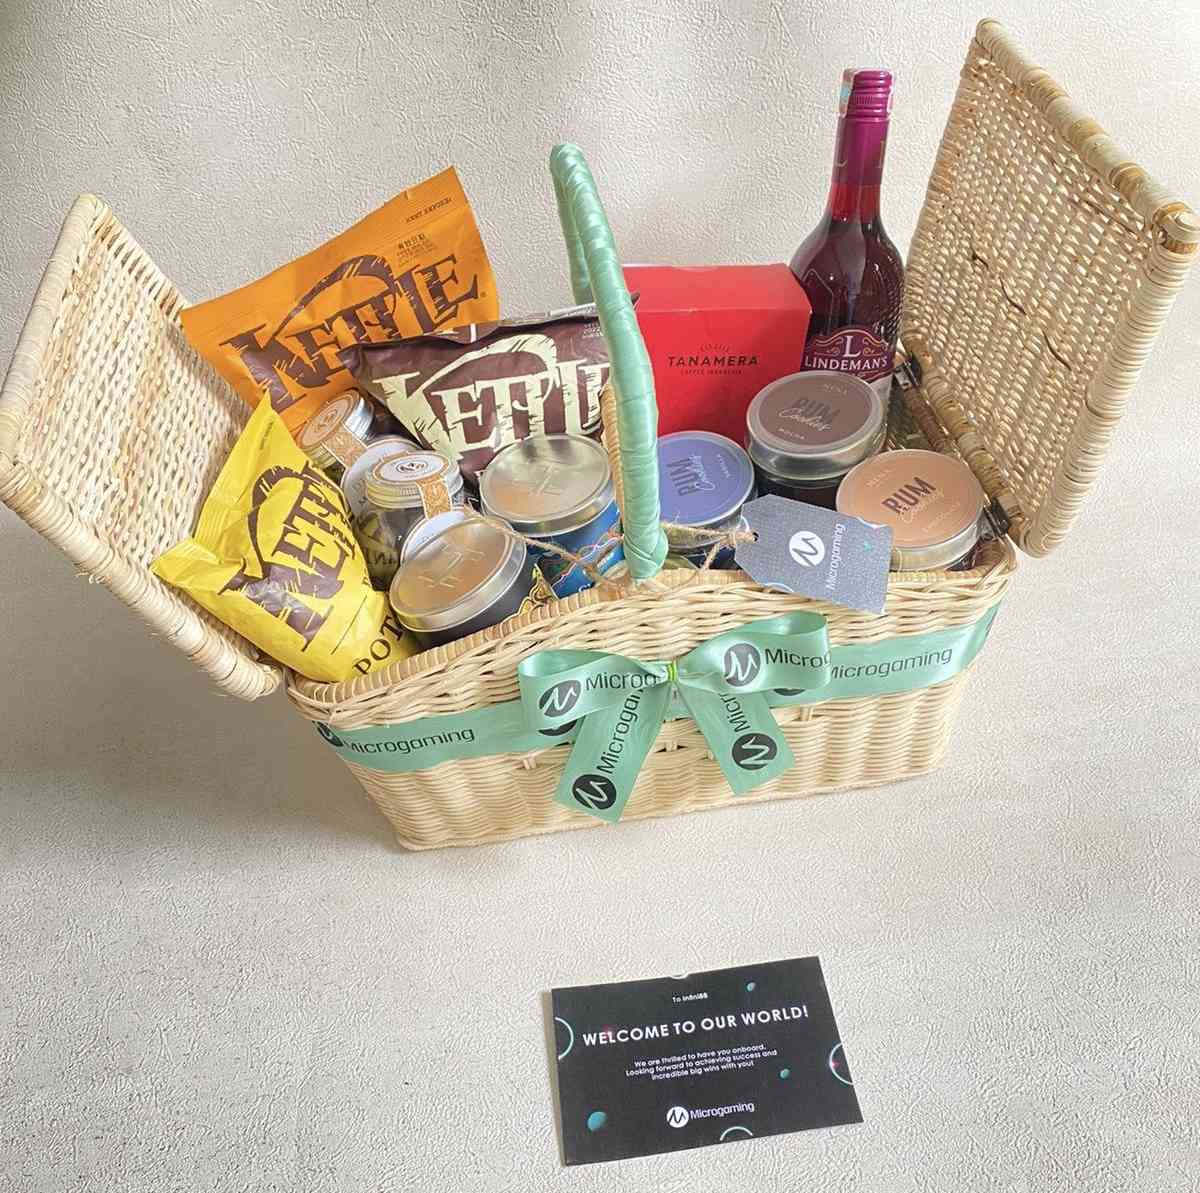 A basket full of delicious snacks can be great company for your employee’s holiday 